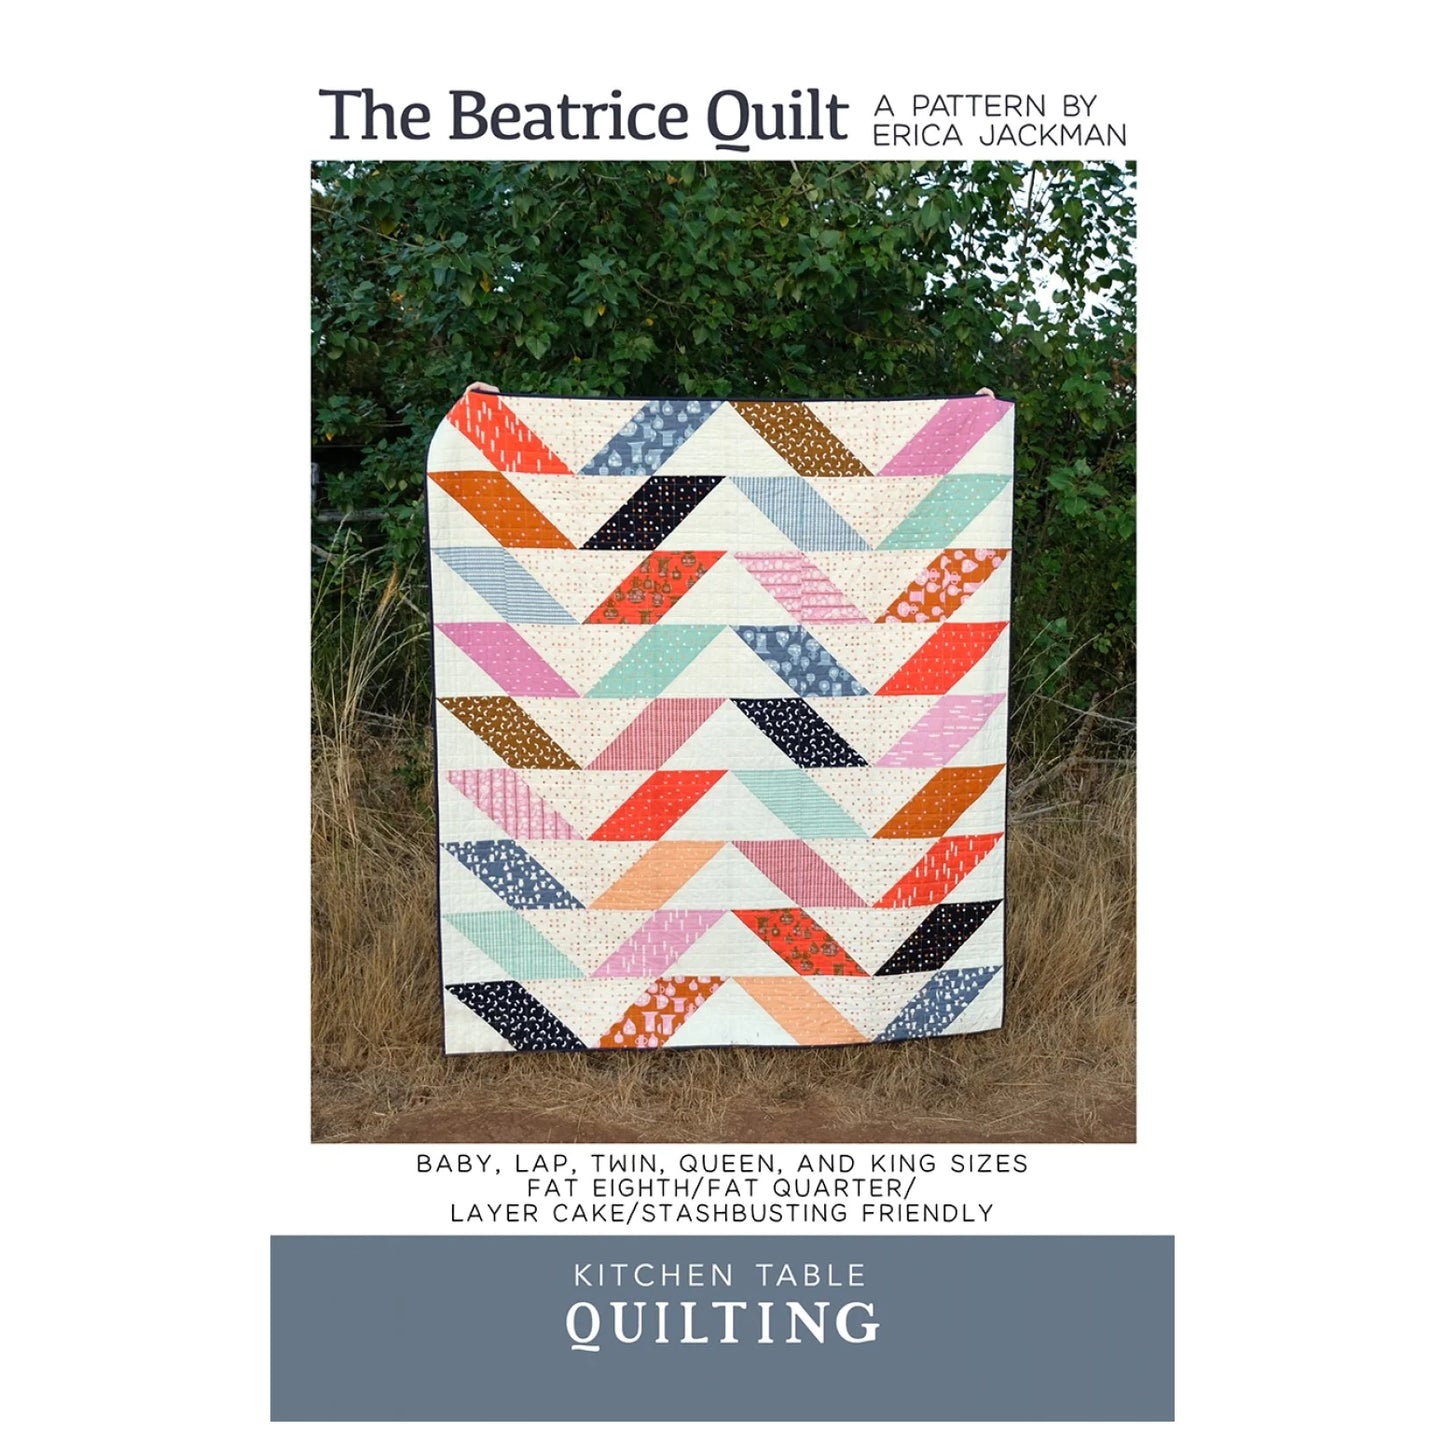 Kitchen Table Quilting - The Beatrice Quilt Pattern